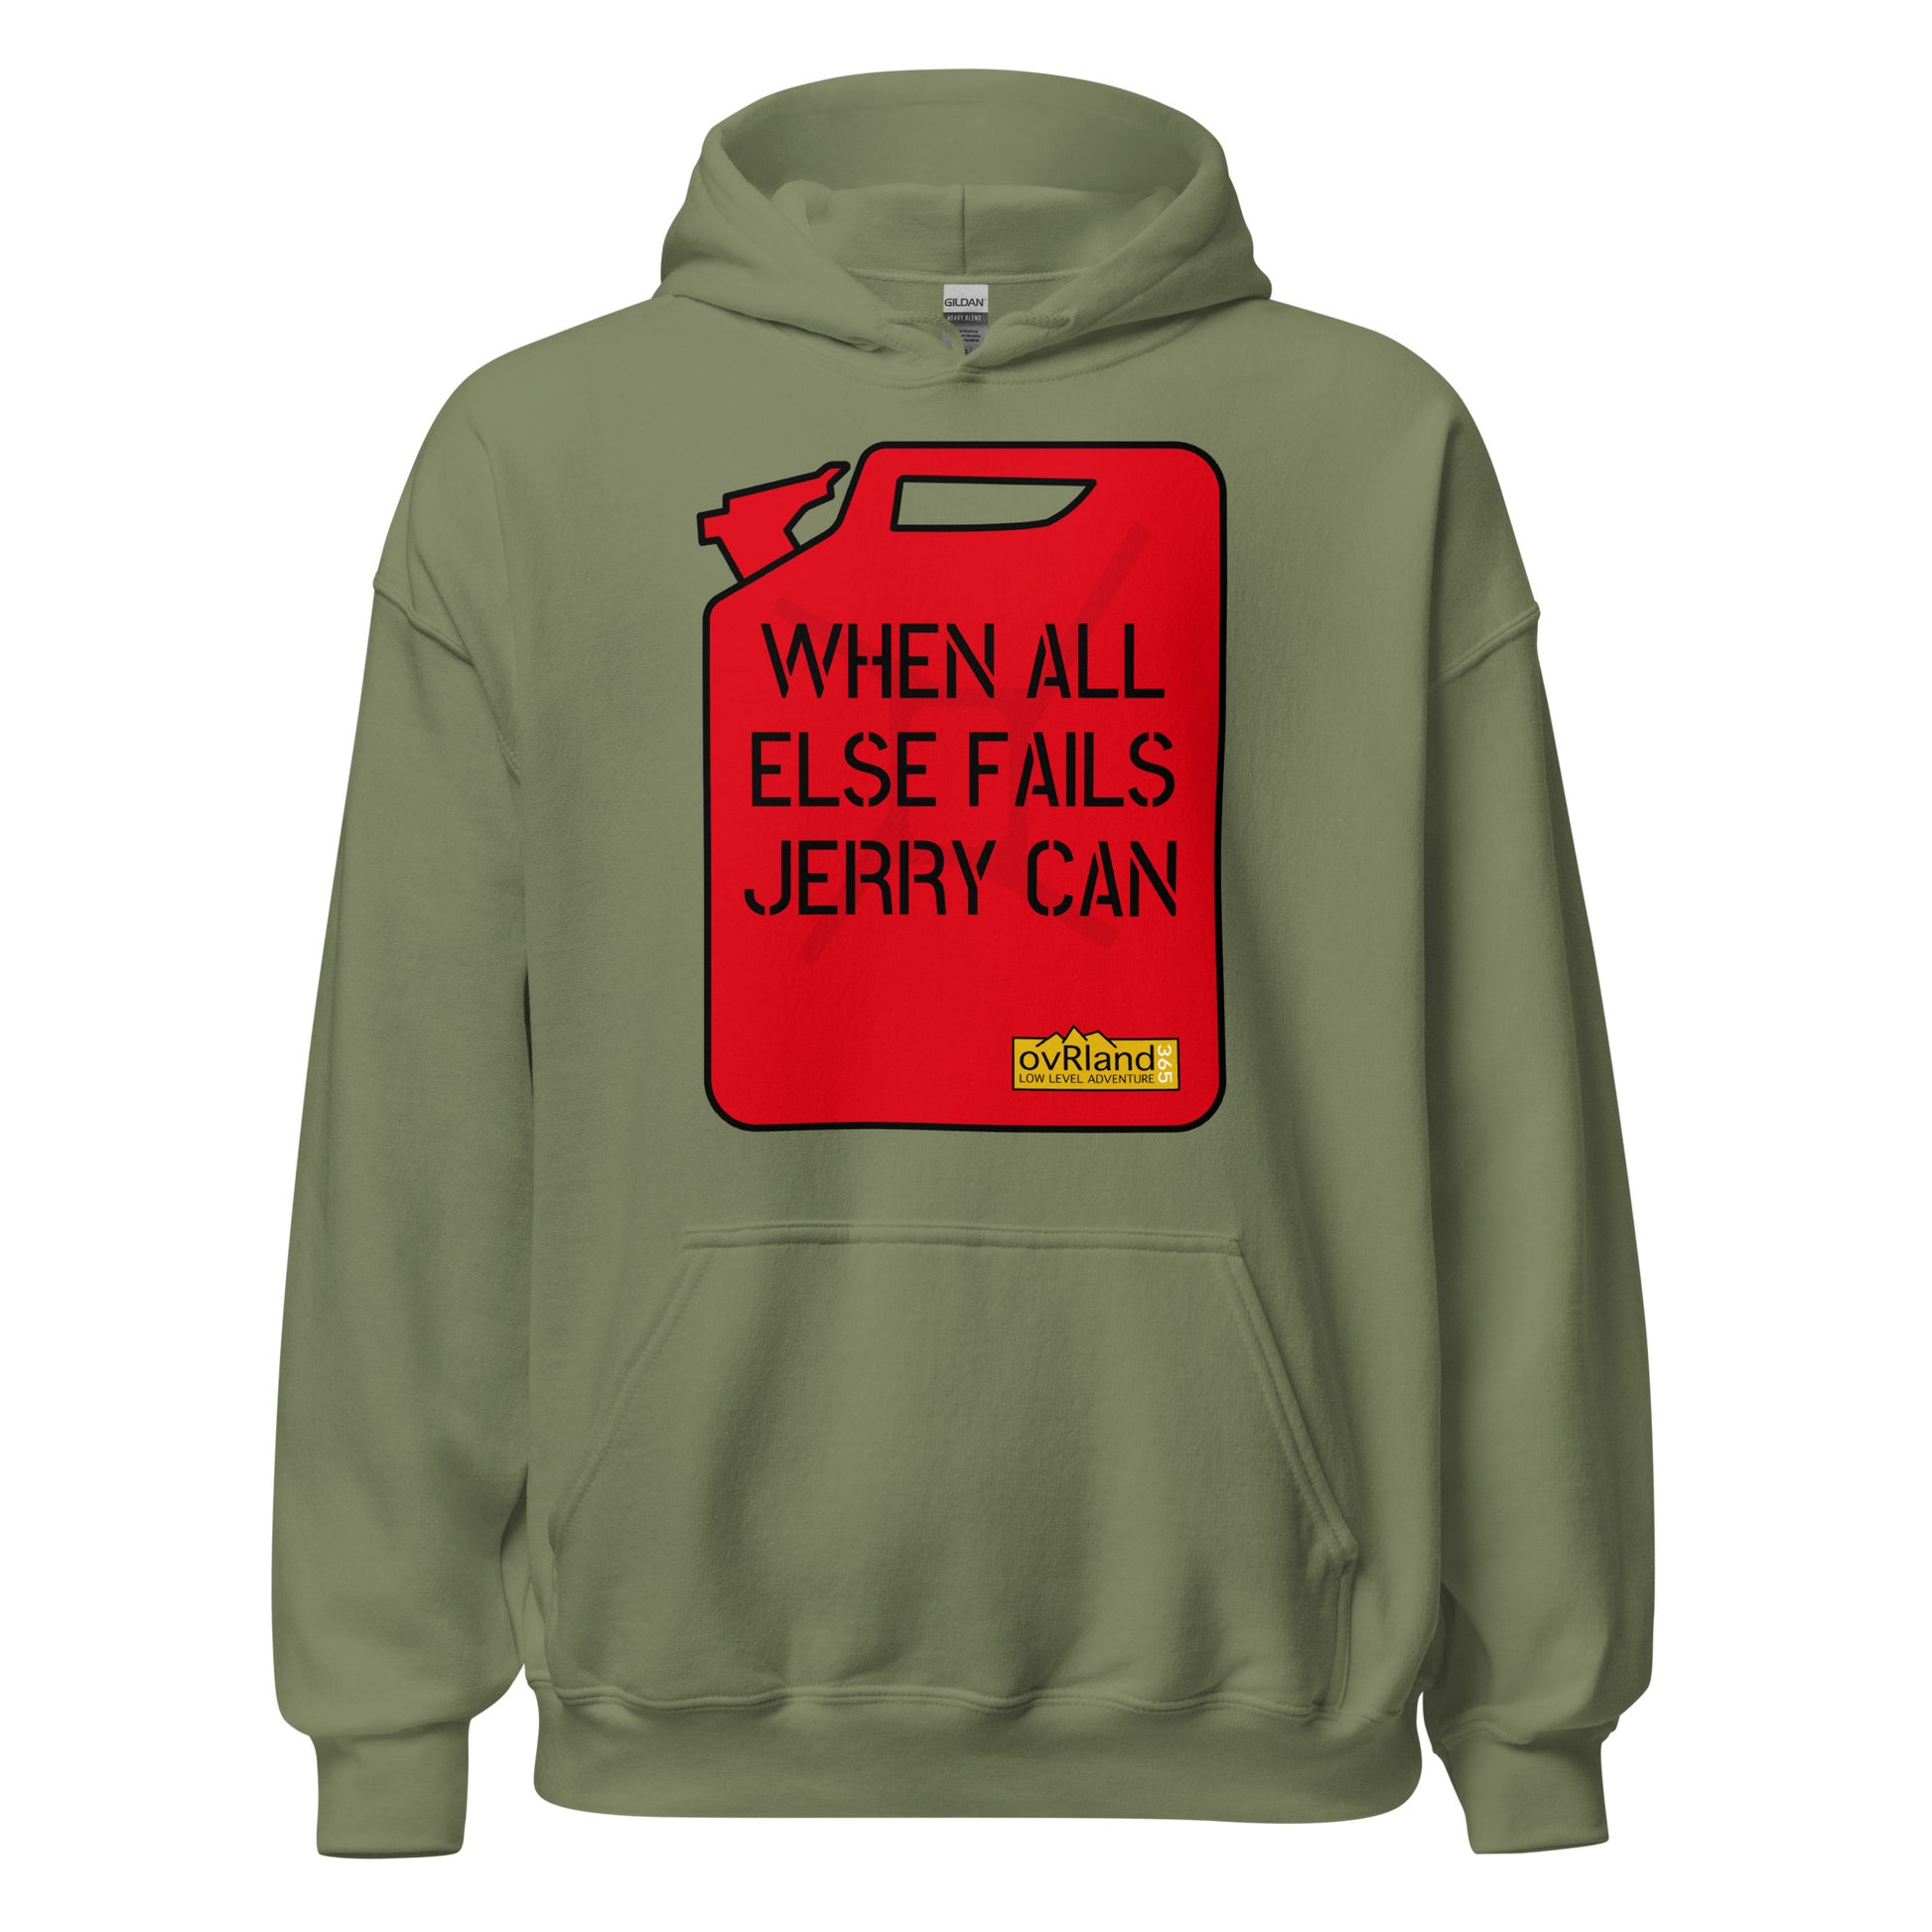 "When all else fails, Jerry Can" - comfortable green hoodie. overland365.com